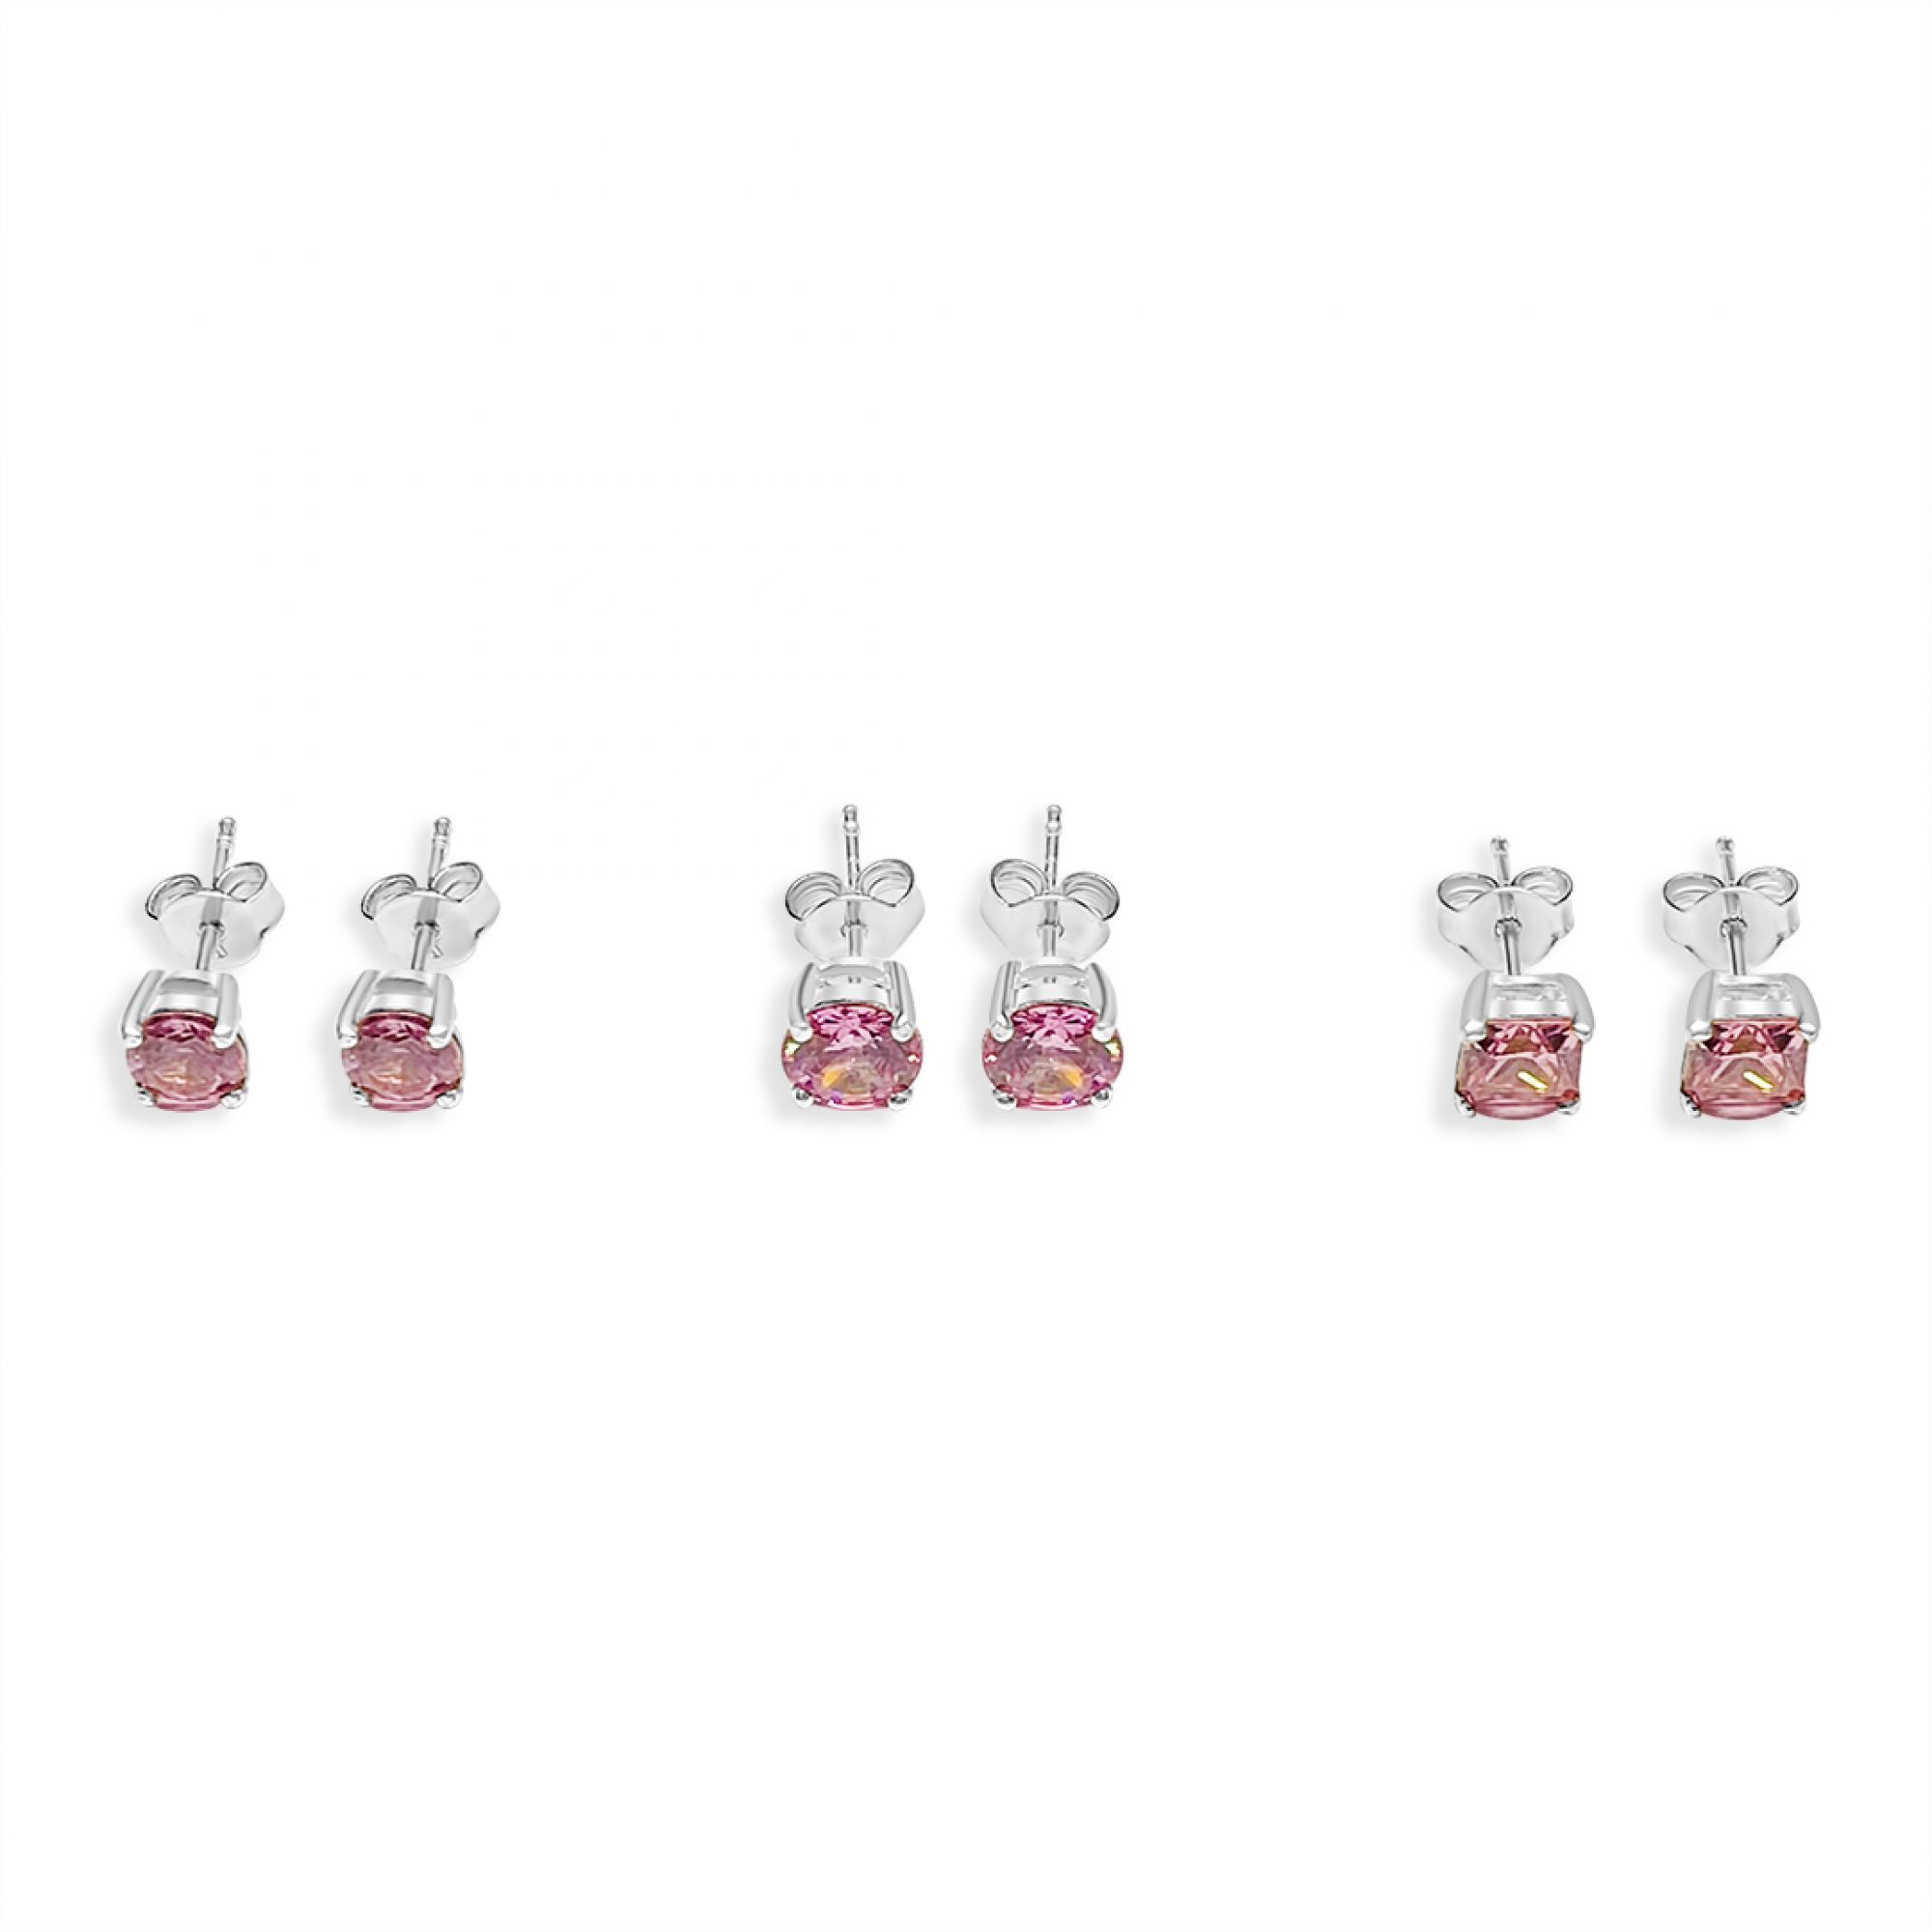 Silver stud earrings with pink quartz stones